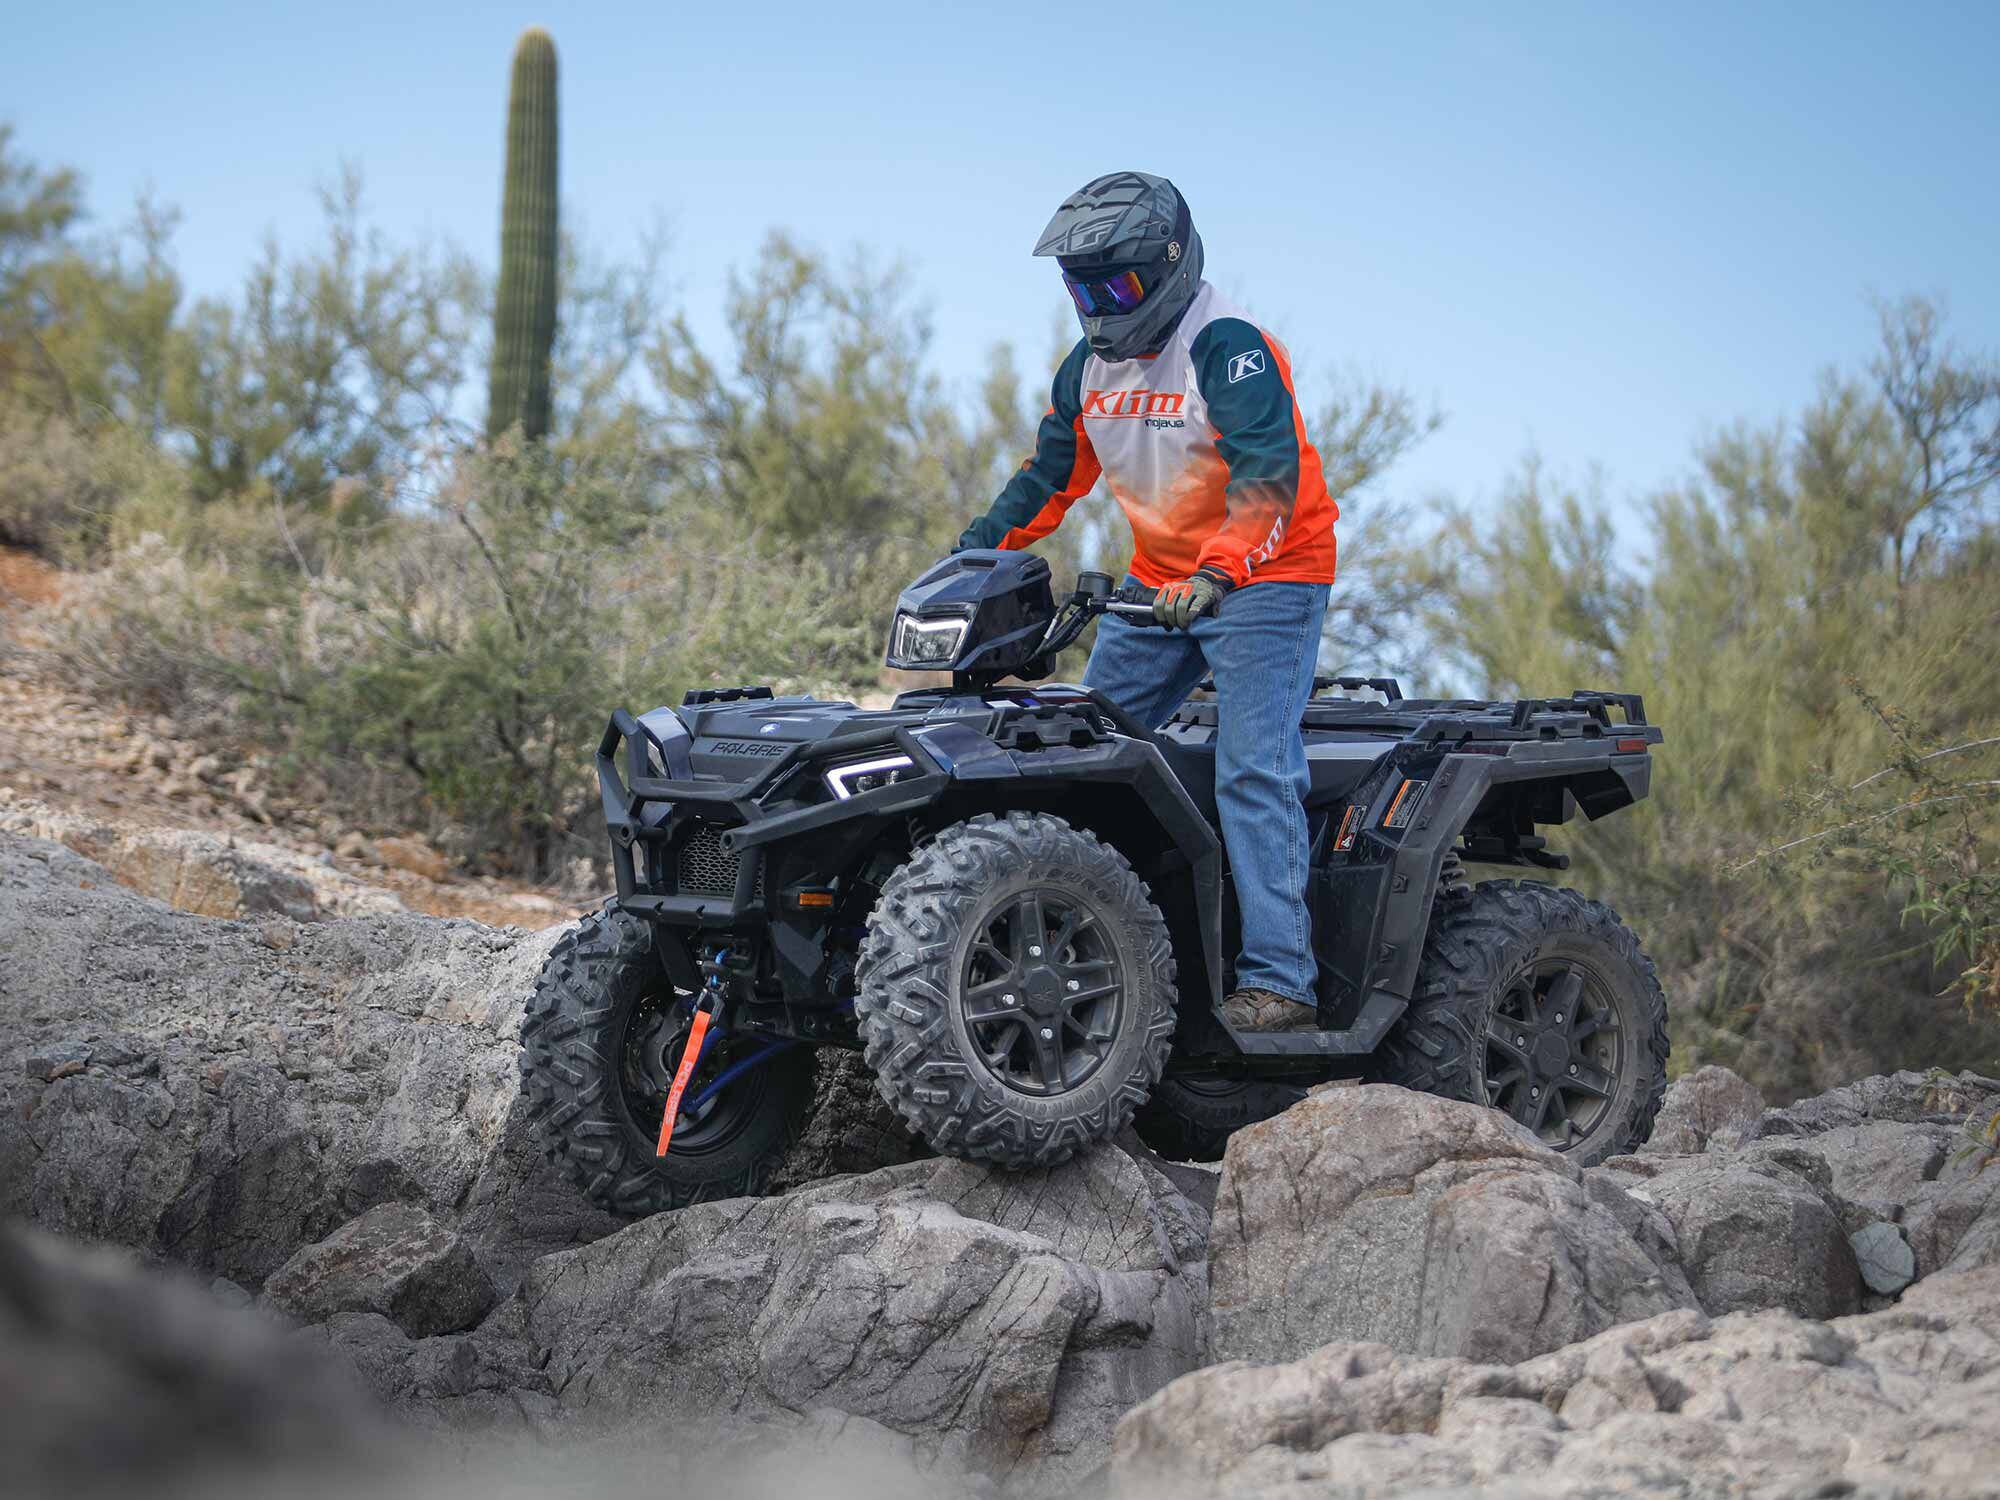 Articulation is key when you’re trail riding and bombing across cattle fields. Here’s our take on the best options for your money for 2022.